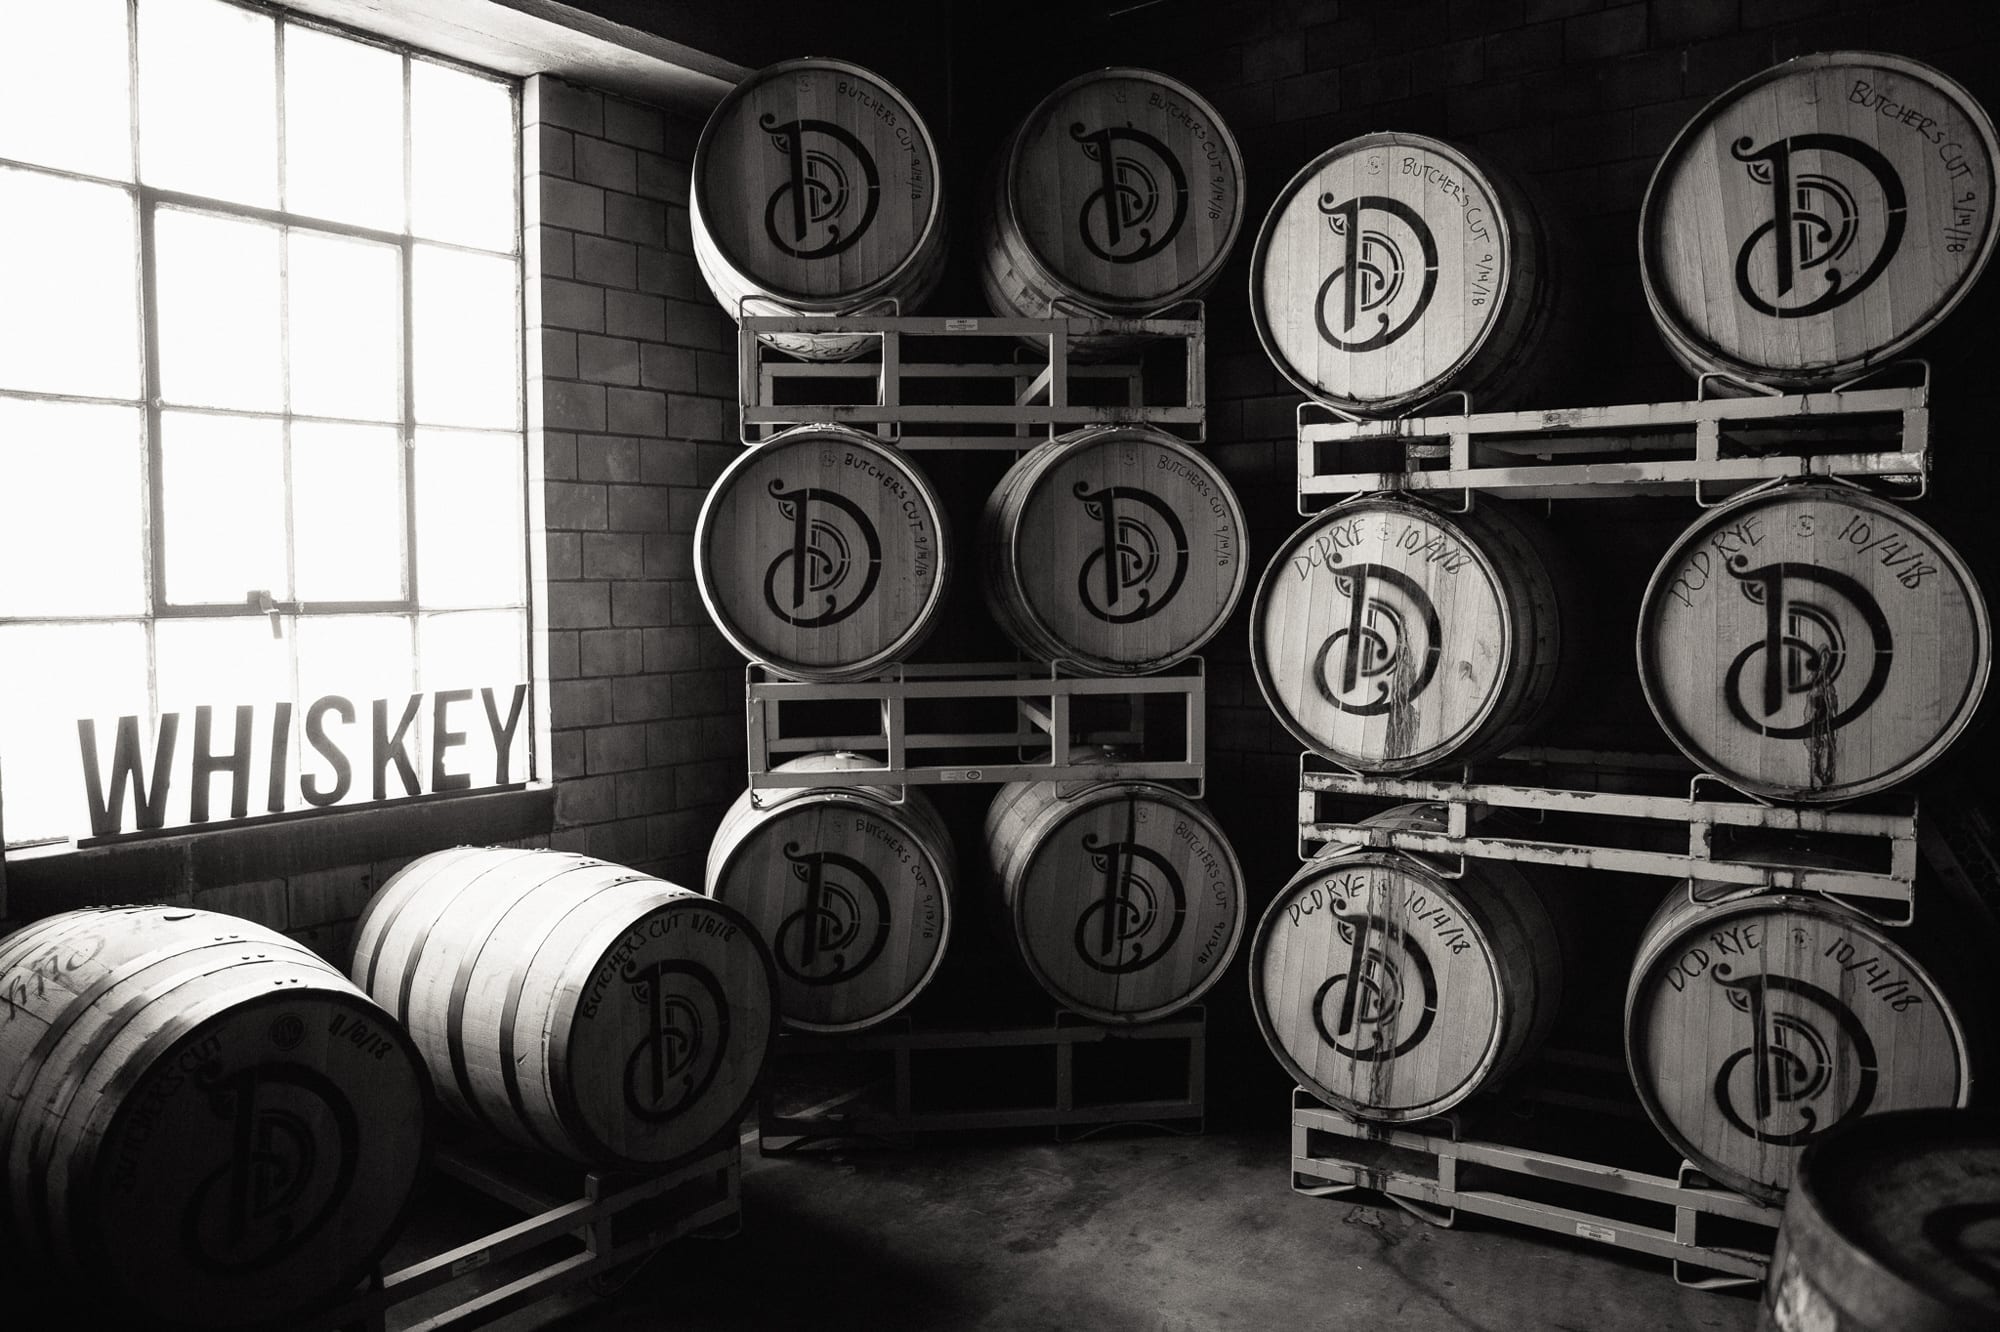 The Whiskey Factory barrels